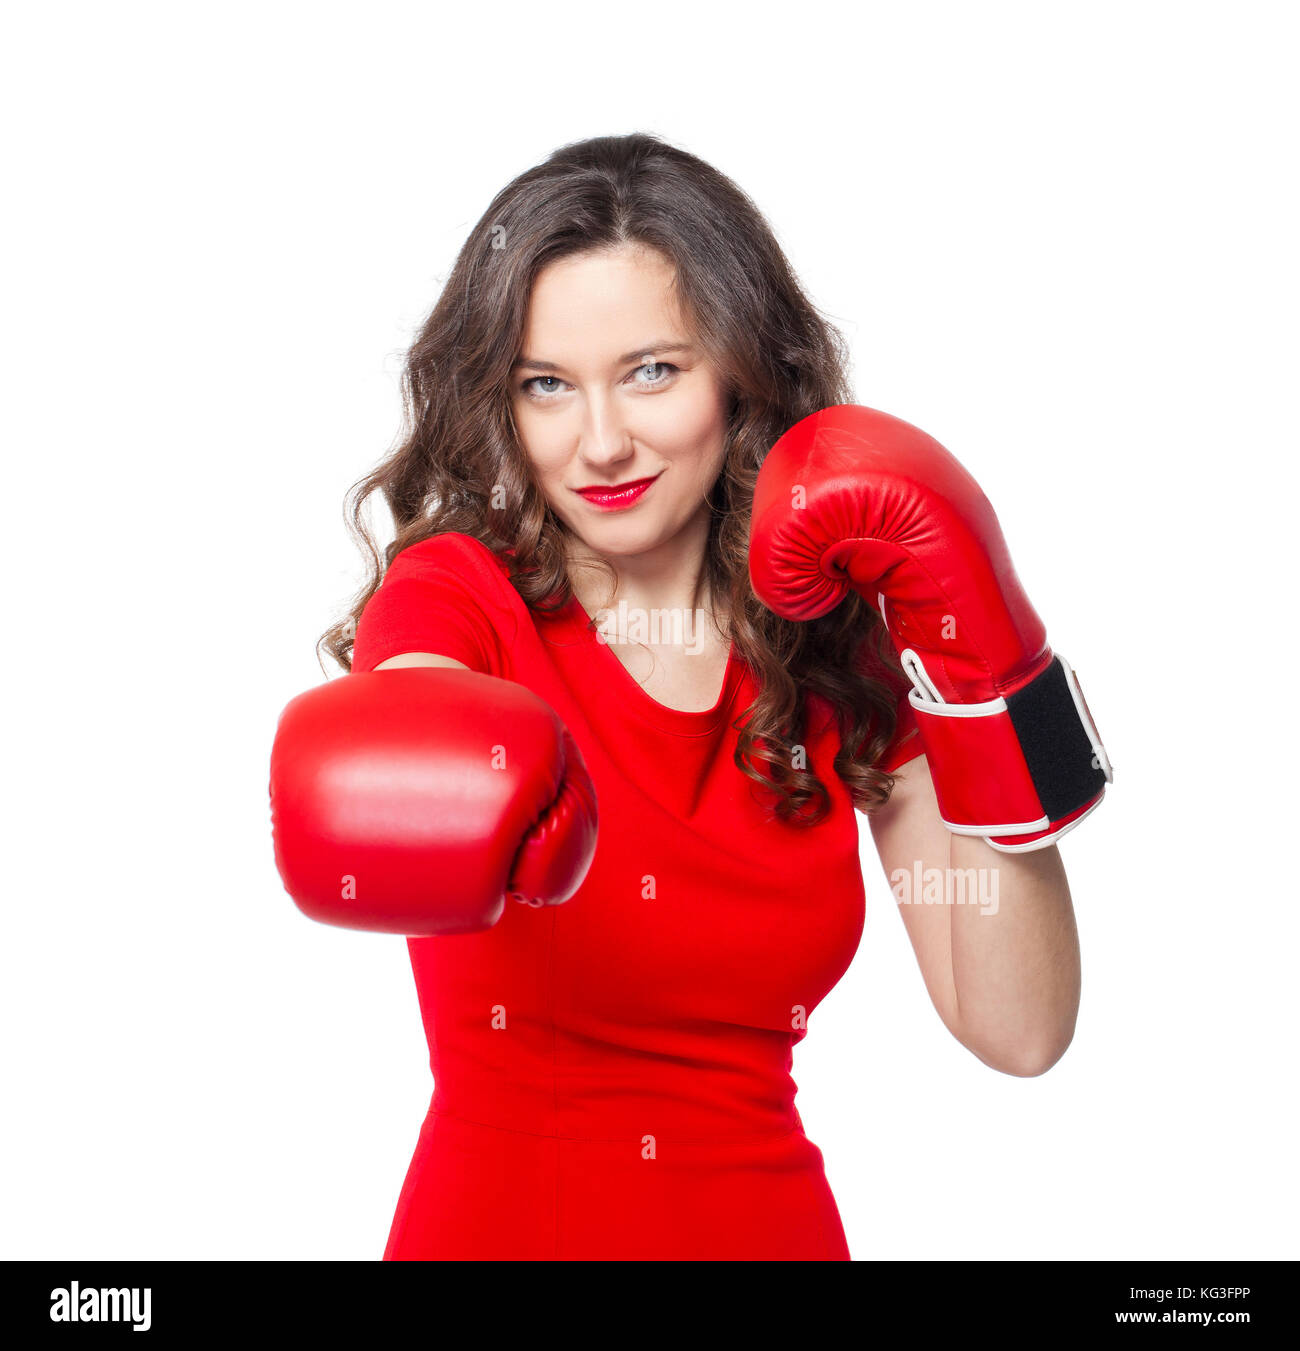 Beautiful girl with red boxing glove isolated on white background Stock Photo